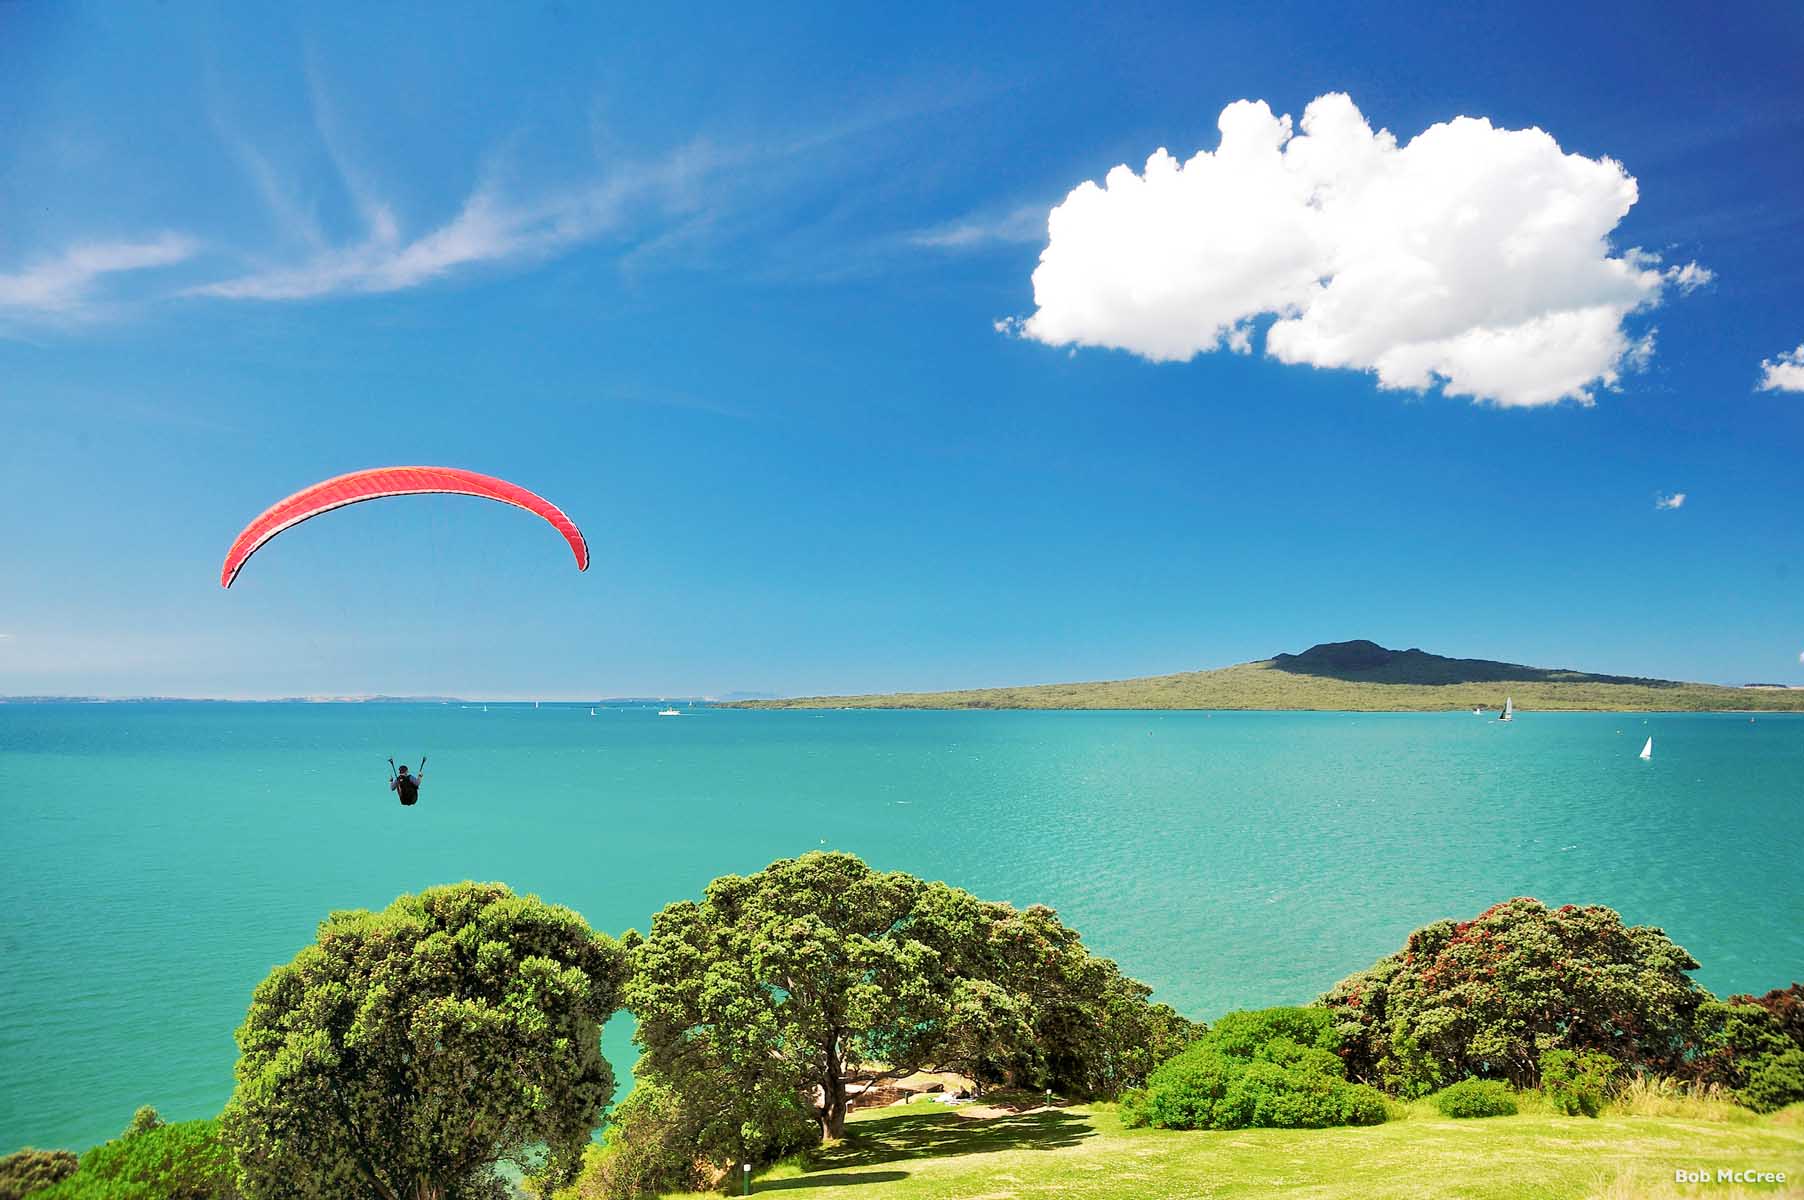 Whether you’re seeking relaxation or a wilderness adventure, the islands of Auckland’s Hauraki Gulf Marine Park have it all. More than 50 islands have been set aside for conservation and most have public access. Visit an island sanctuary to see rare and endangered birds, climb a volcanic cone or simply relax in the sun on a white sand beach.